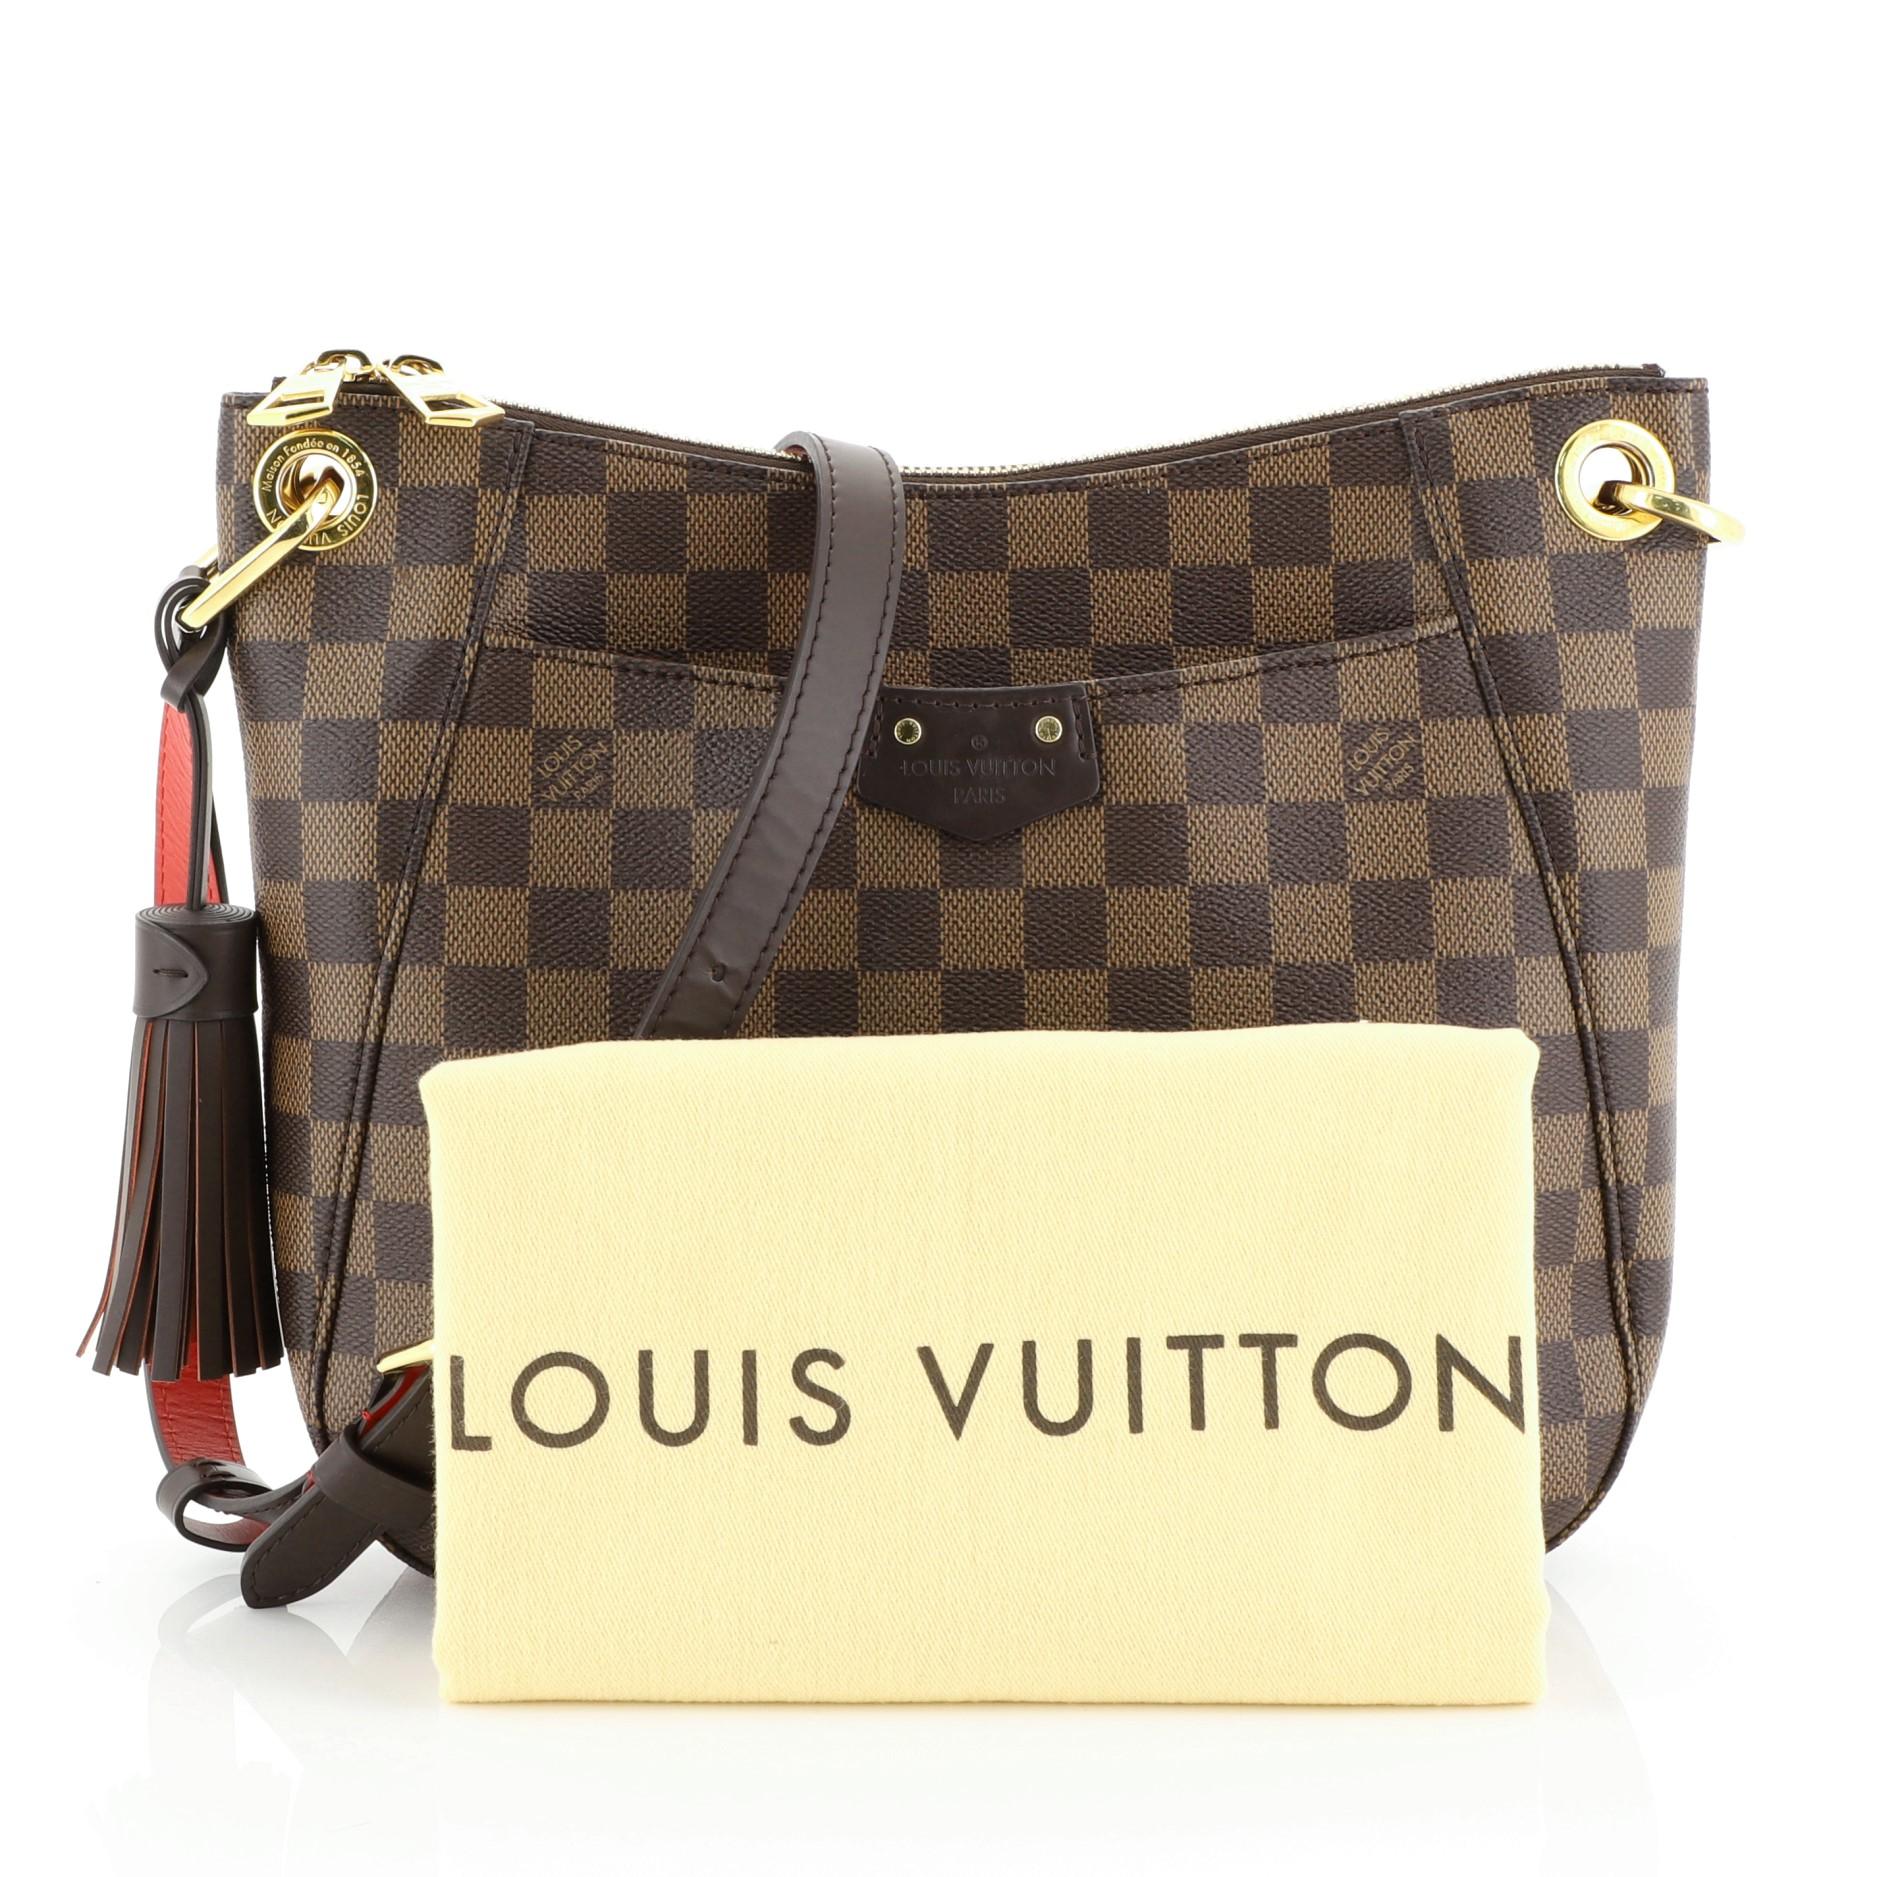 This Louis Vuitton South Bank Besace Bag Damier, crafted in damier ebene coated canvas, features an adjustable leather shoulder strap, leather trim, full facing patch pocket, and gold-tone hardware. Its zip closure opens to a red fabric interior